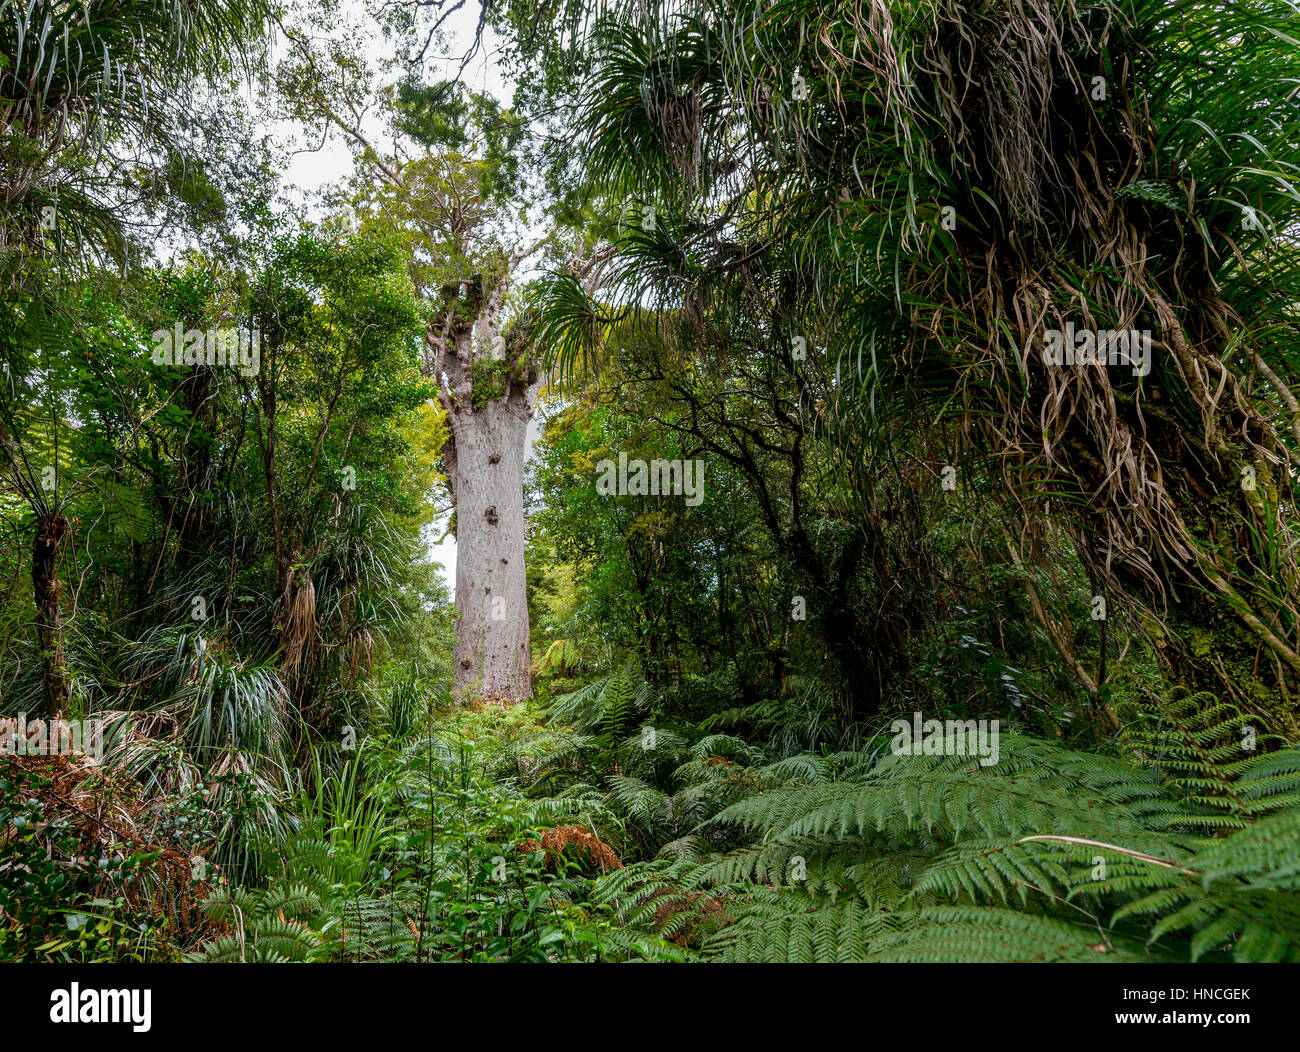 Oldest Kauri tree, Tāne Mahuta, Lord of the forest or god of the forest, dense rainforest, Waipoua forest, Northland Stock Photo